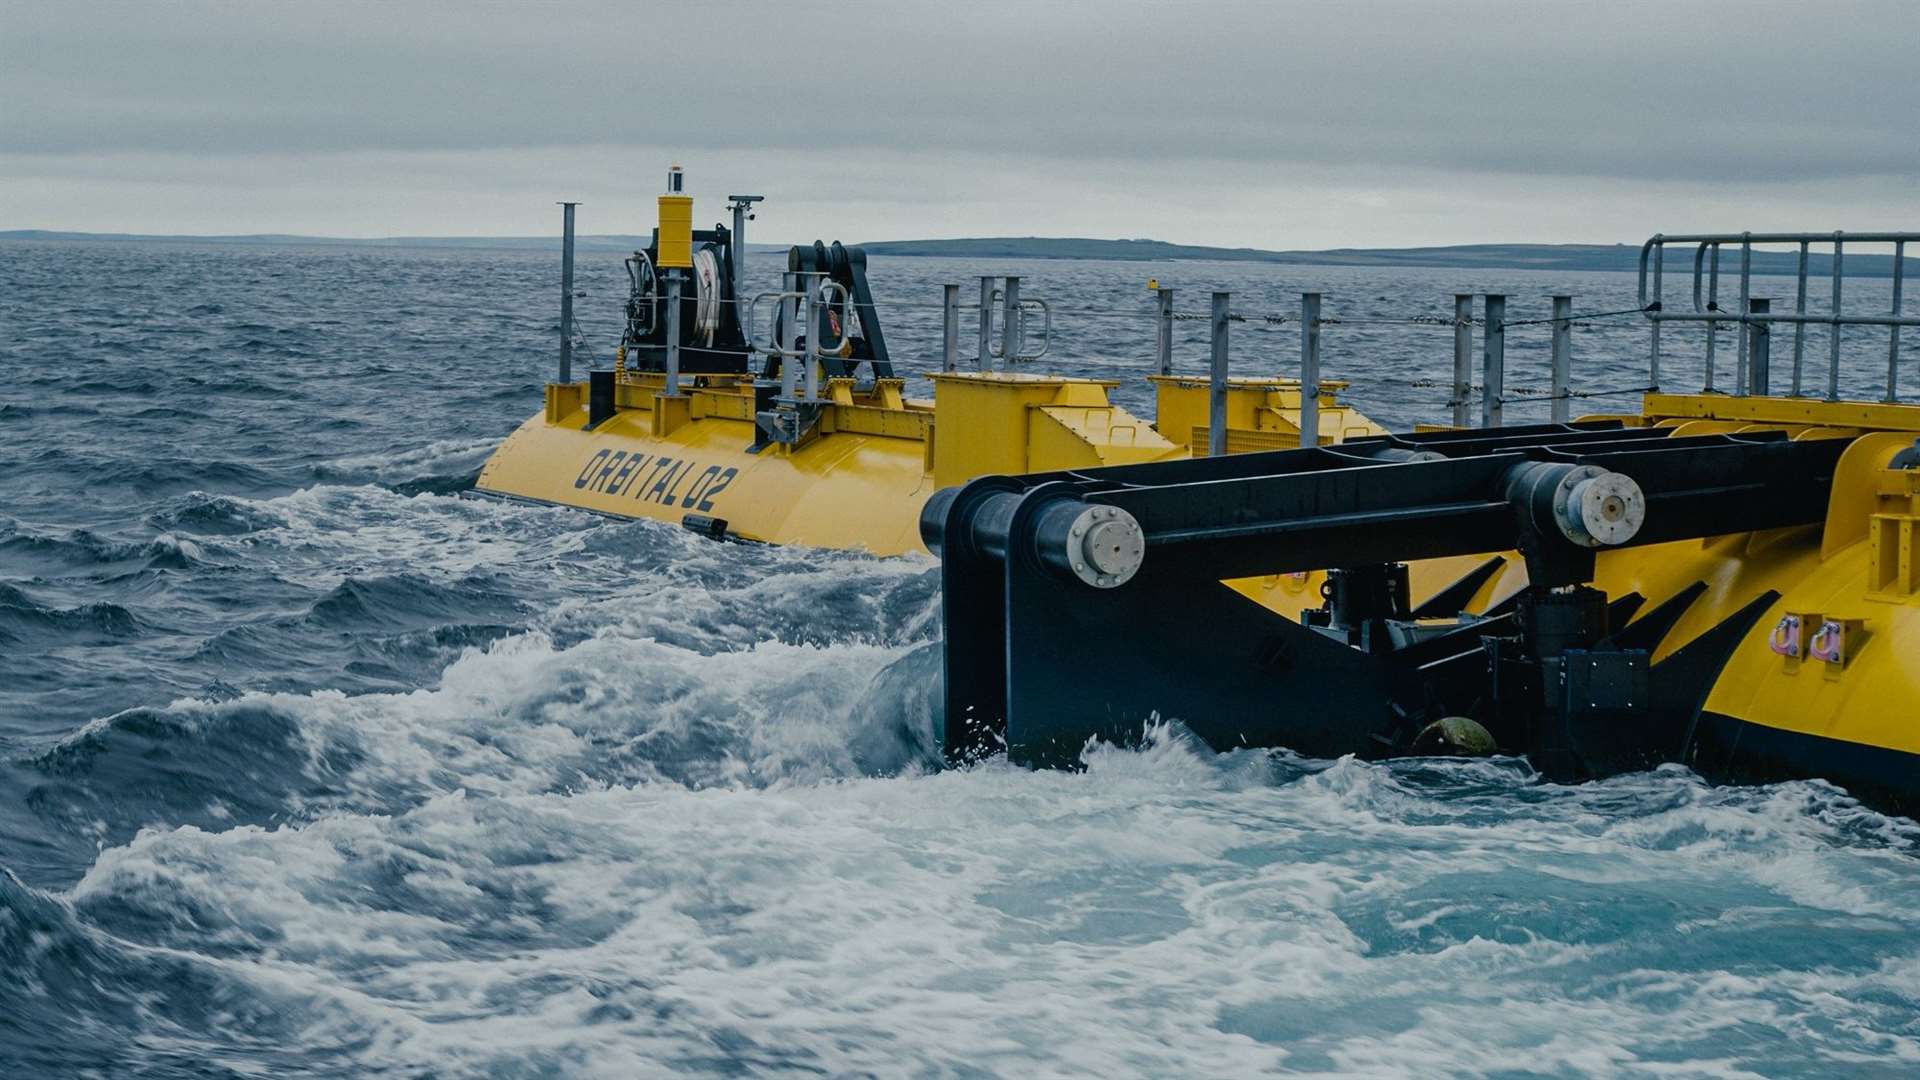 Orbital's tidal turbine in Orkney is soon to be joined by other pioneering Orbital projects on the south coast of England and off north Wales.